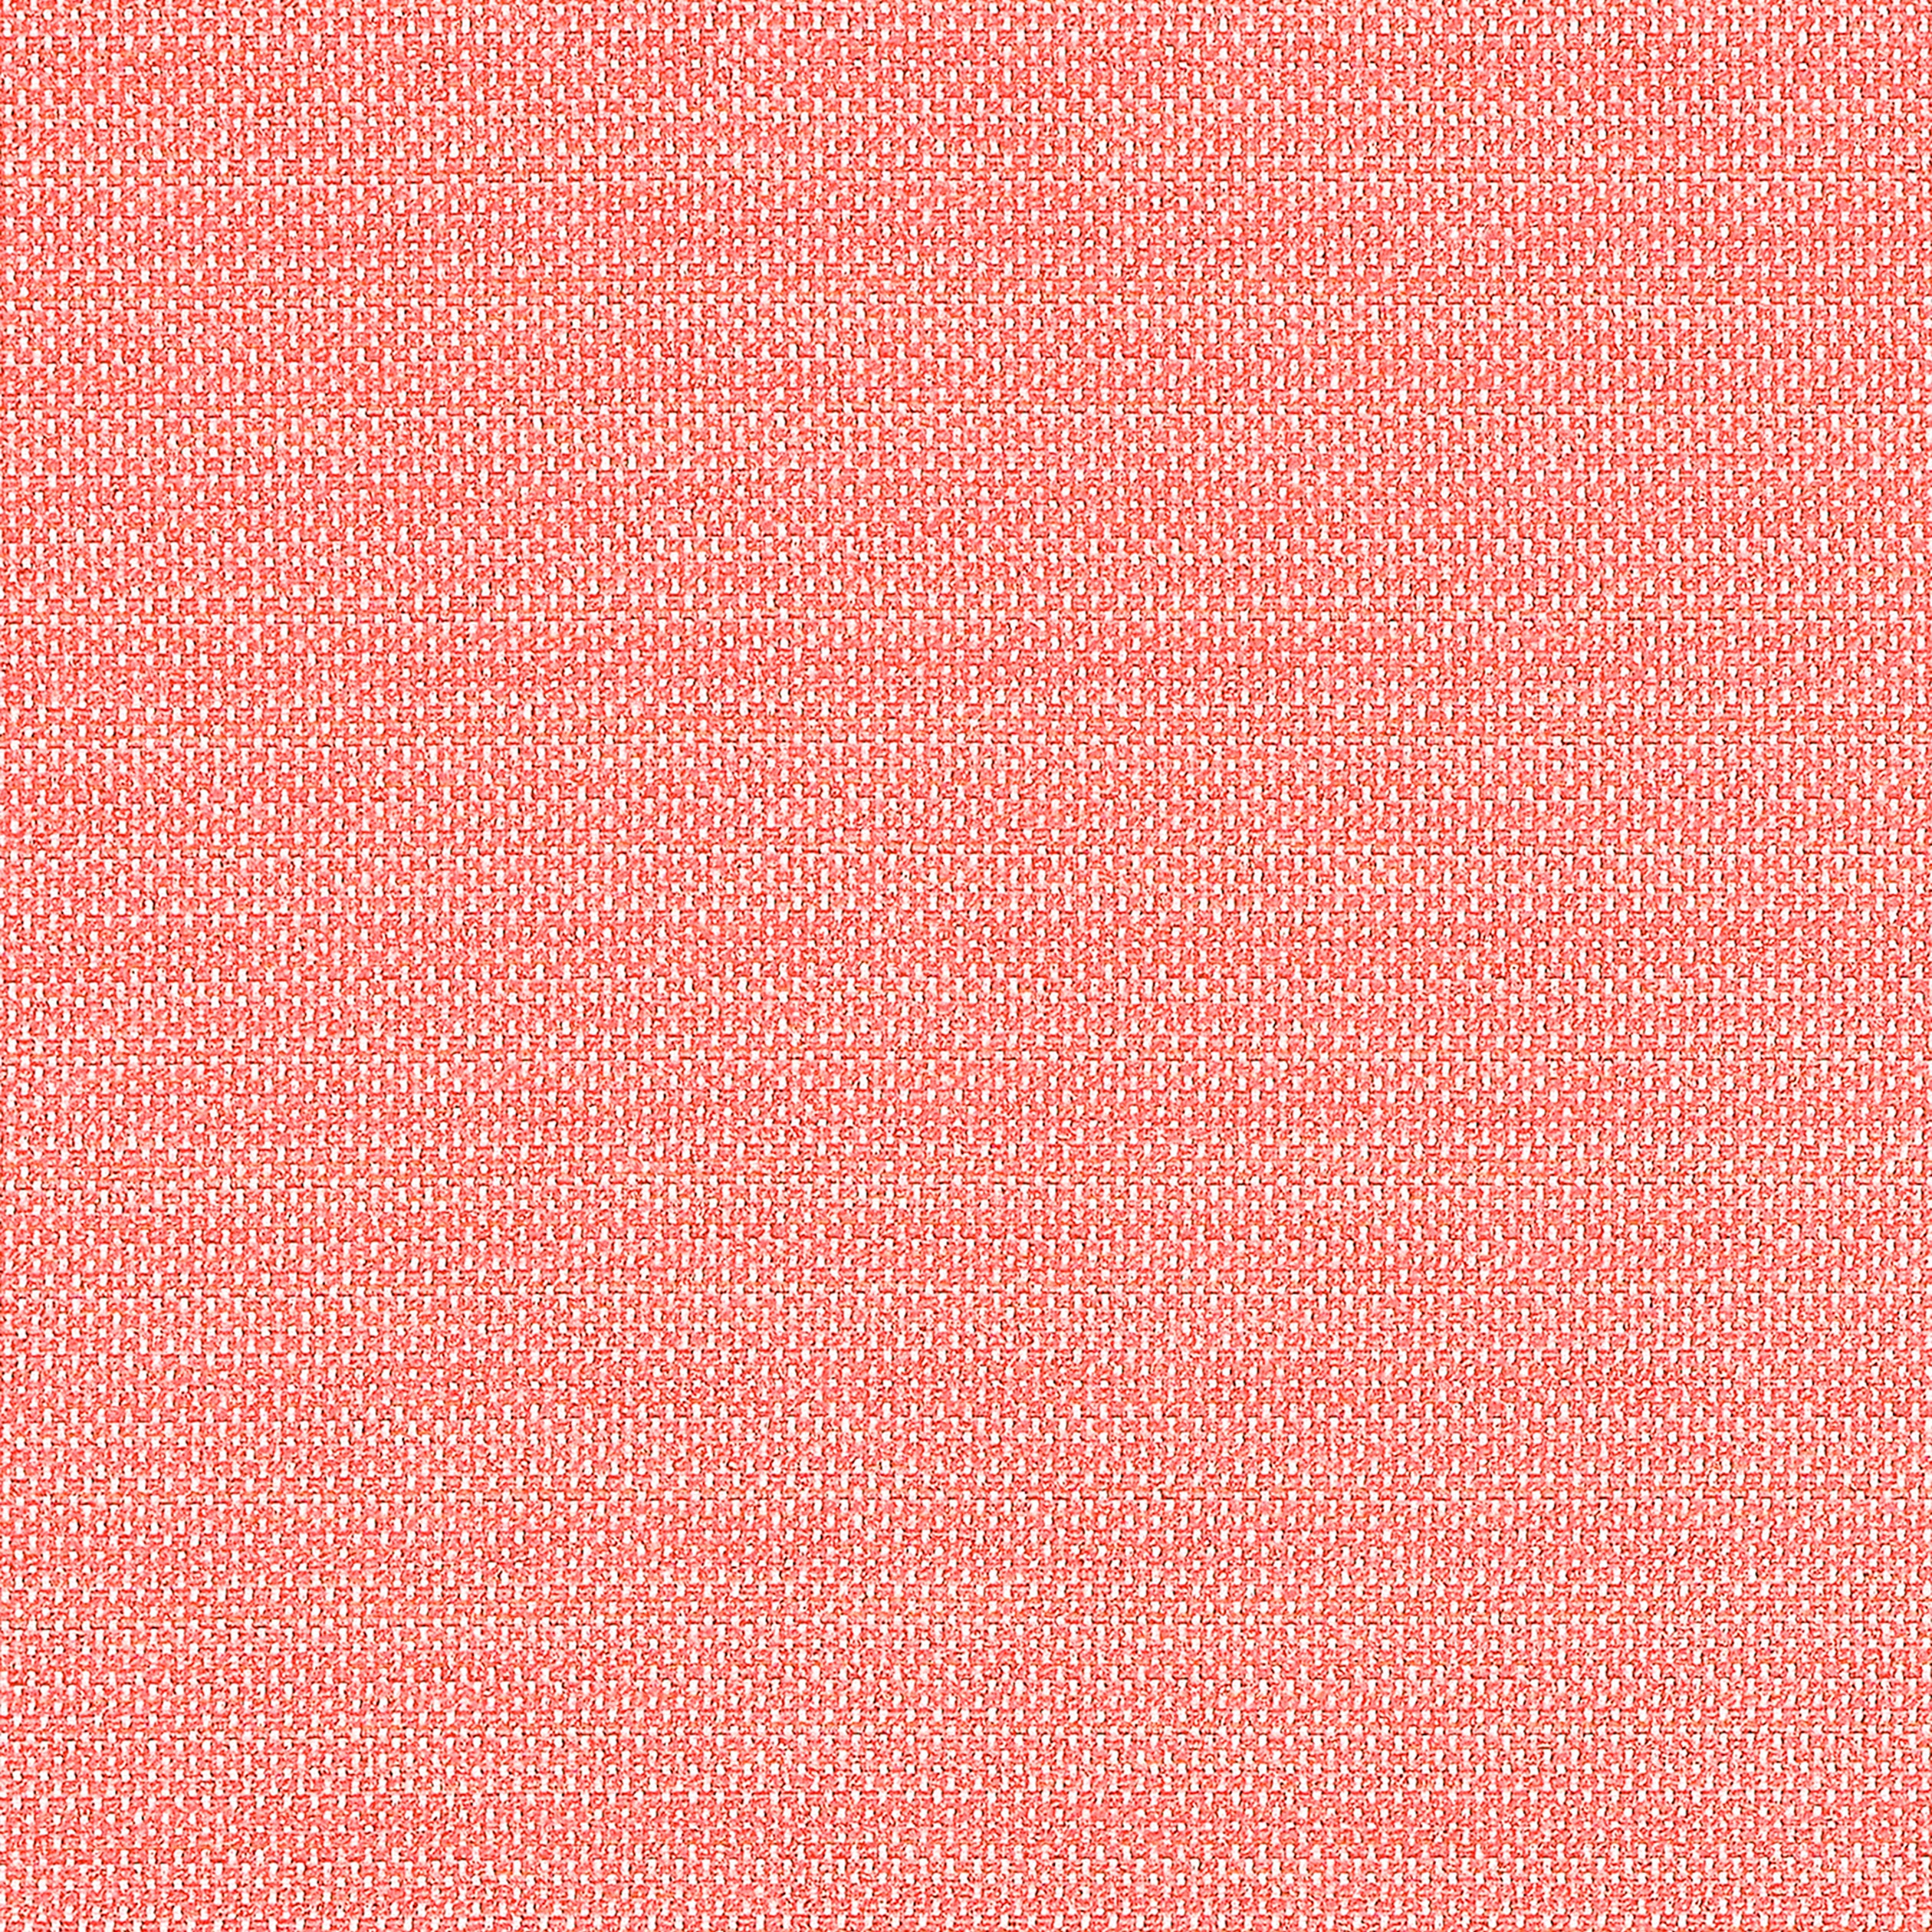 Cameron fabric in coral color - pattern number W81646 - by Thibaut in the Locale collection